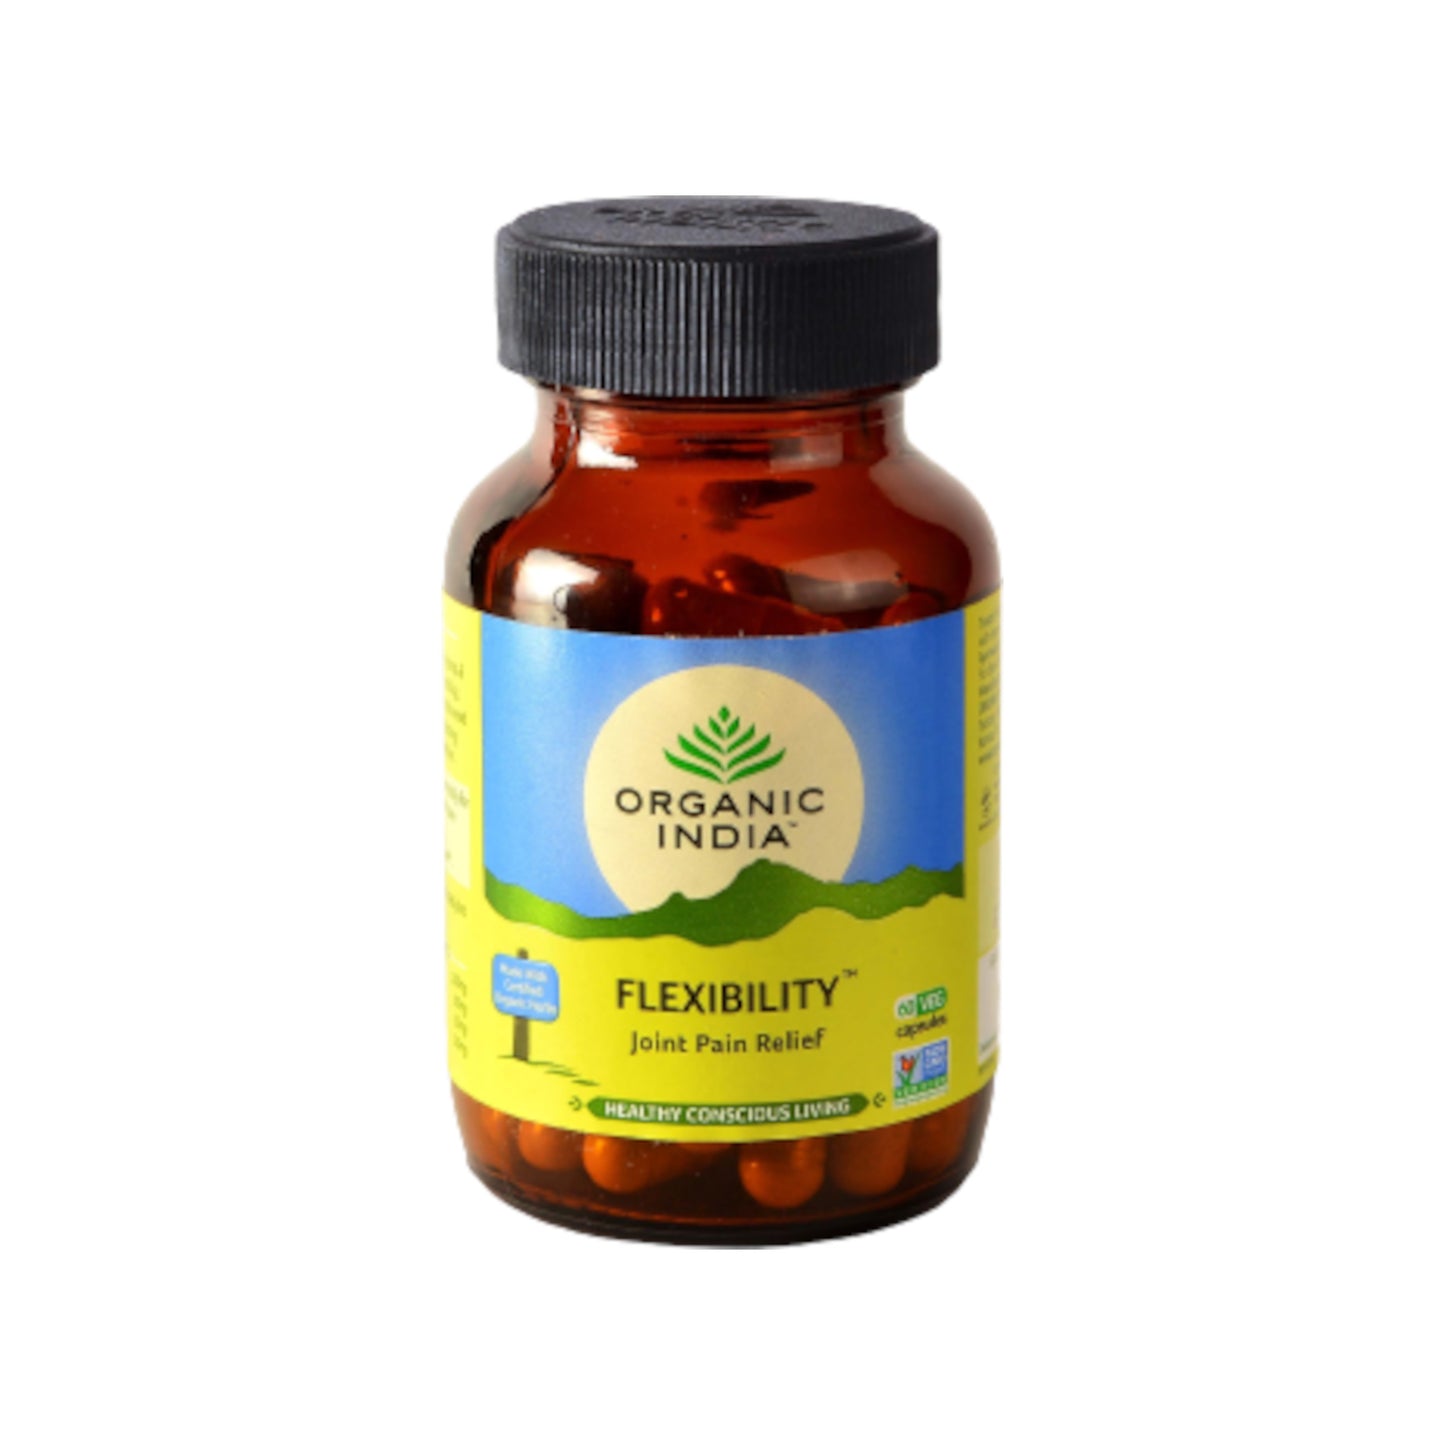 Image: Organic India Flexibility 60 Capsules - Supports joint health, reduces inflammation, and improves flexibility.